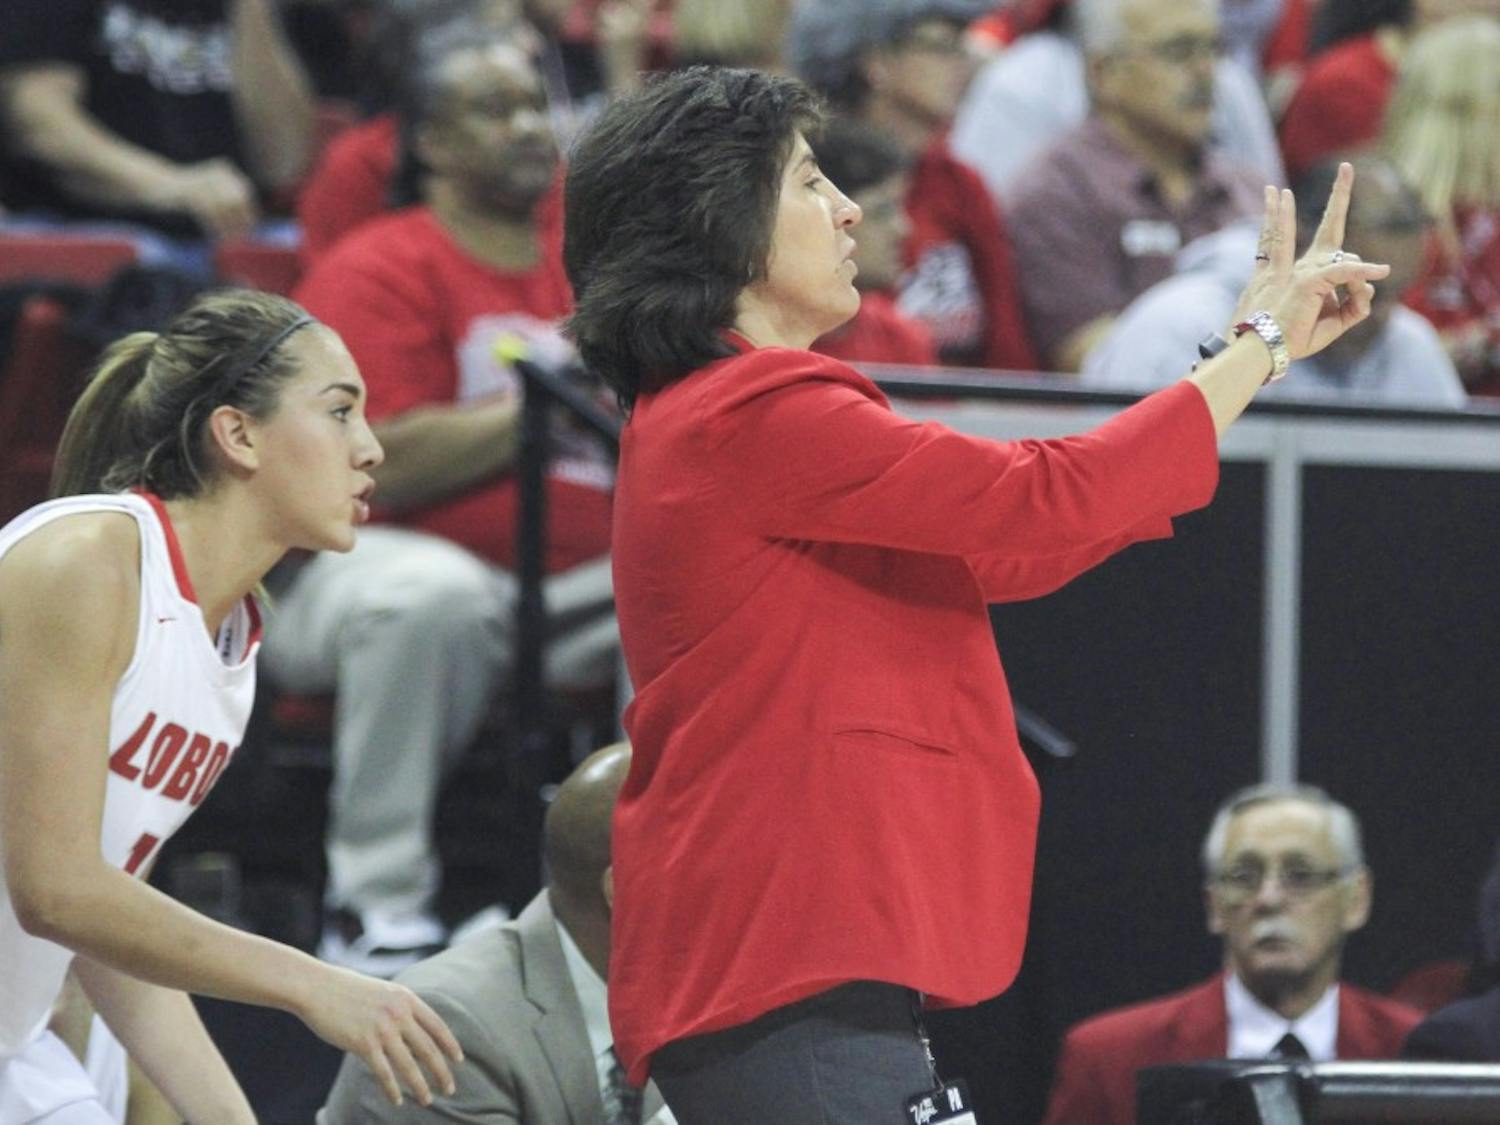 New Mexico head coach Yvonne Sanchez calls a play for her team late in the first half as Alexa Chavez checks into the game during the Mountain West Basketball Championship game Friday afternoon at the Thomas & Mack Center in Las Vegas, Nevada.